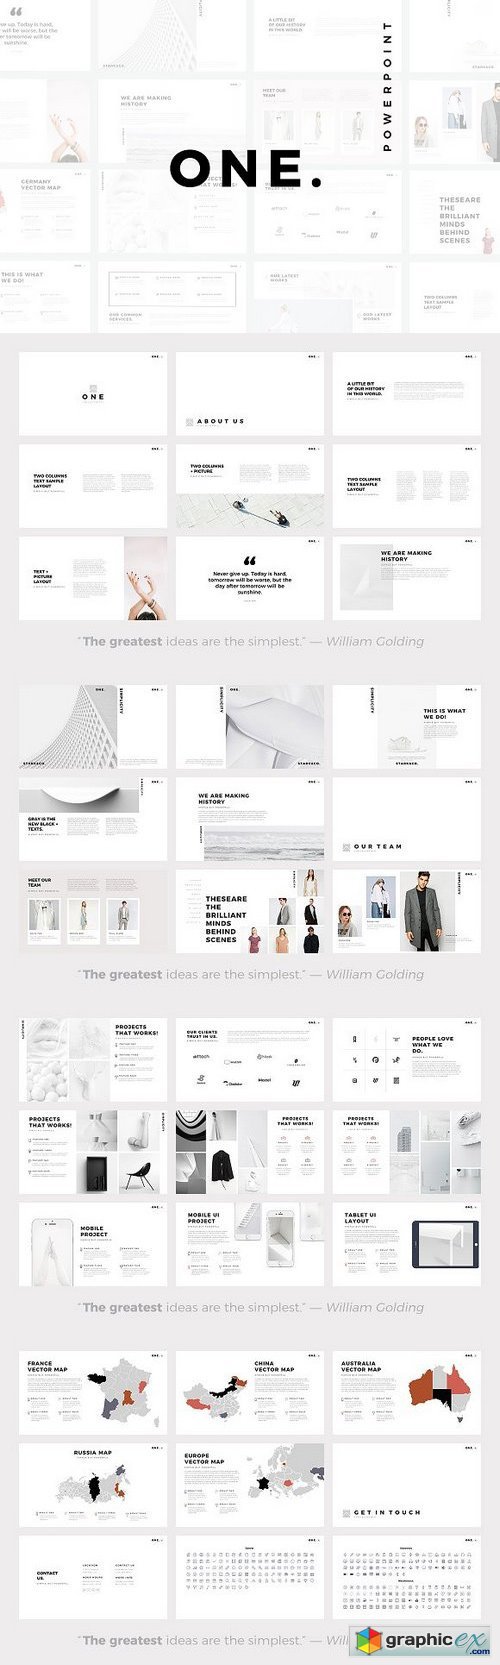 ONE. Minimal PowerPoint Template